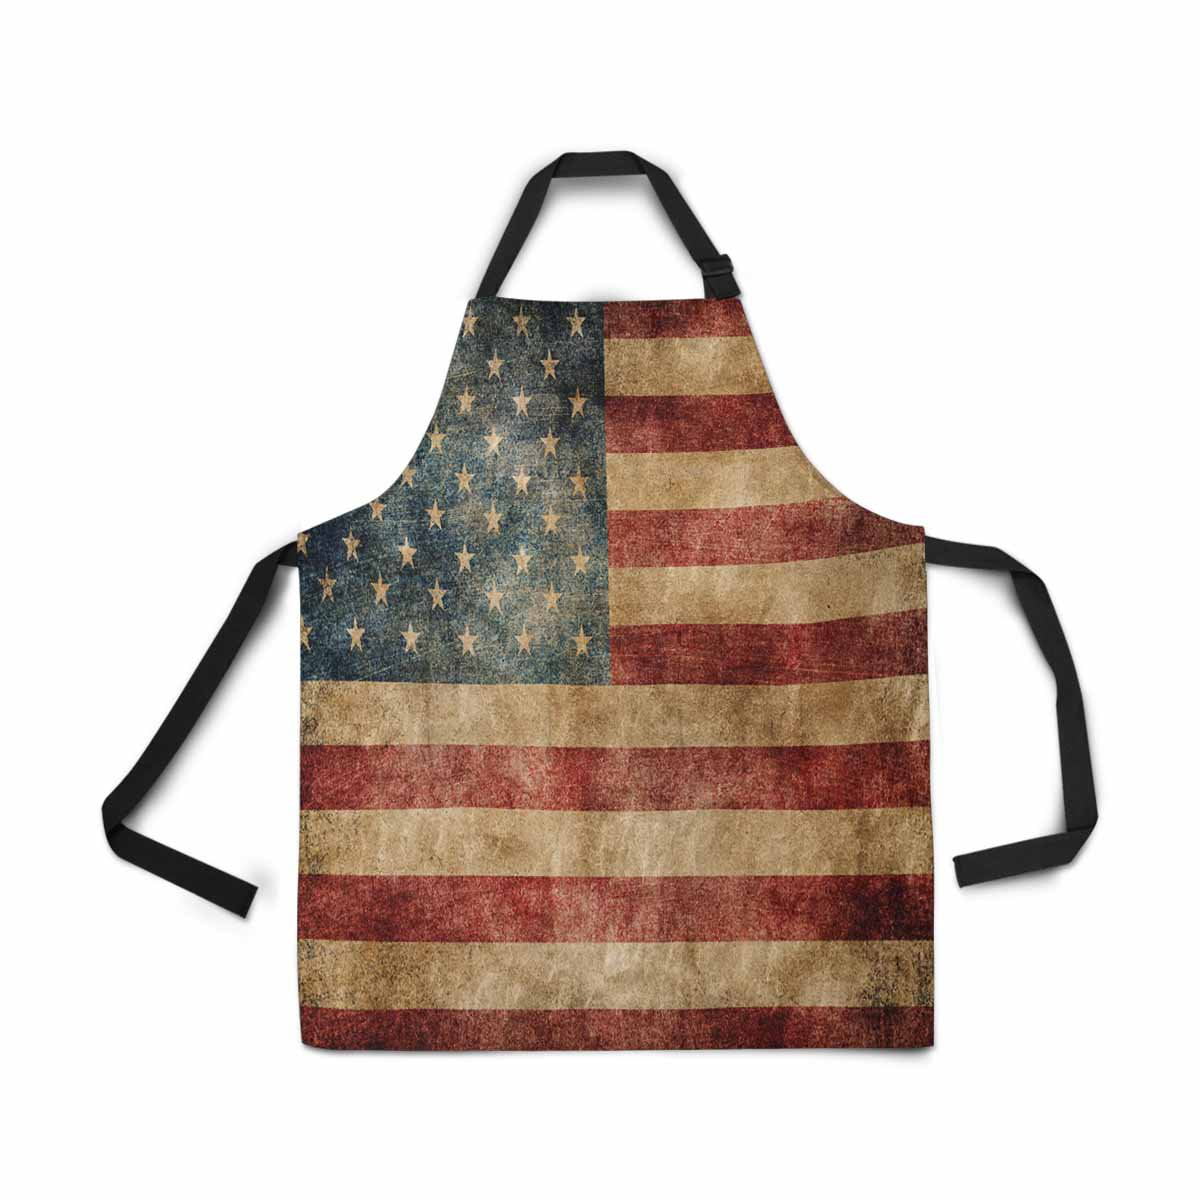 ASHLEIGH Vintage American USA Flag Apron Kitchen Cook for Women Men Girls Chef with Pockets Star Stripe American Patriotic Funny Adjustable Bib Baking Paint Cooking Apron Dress